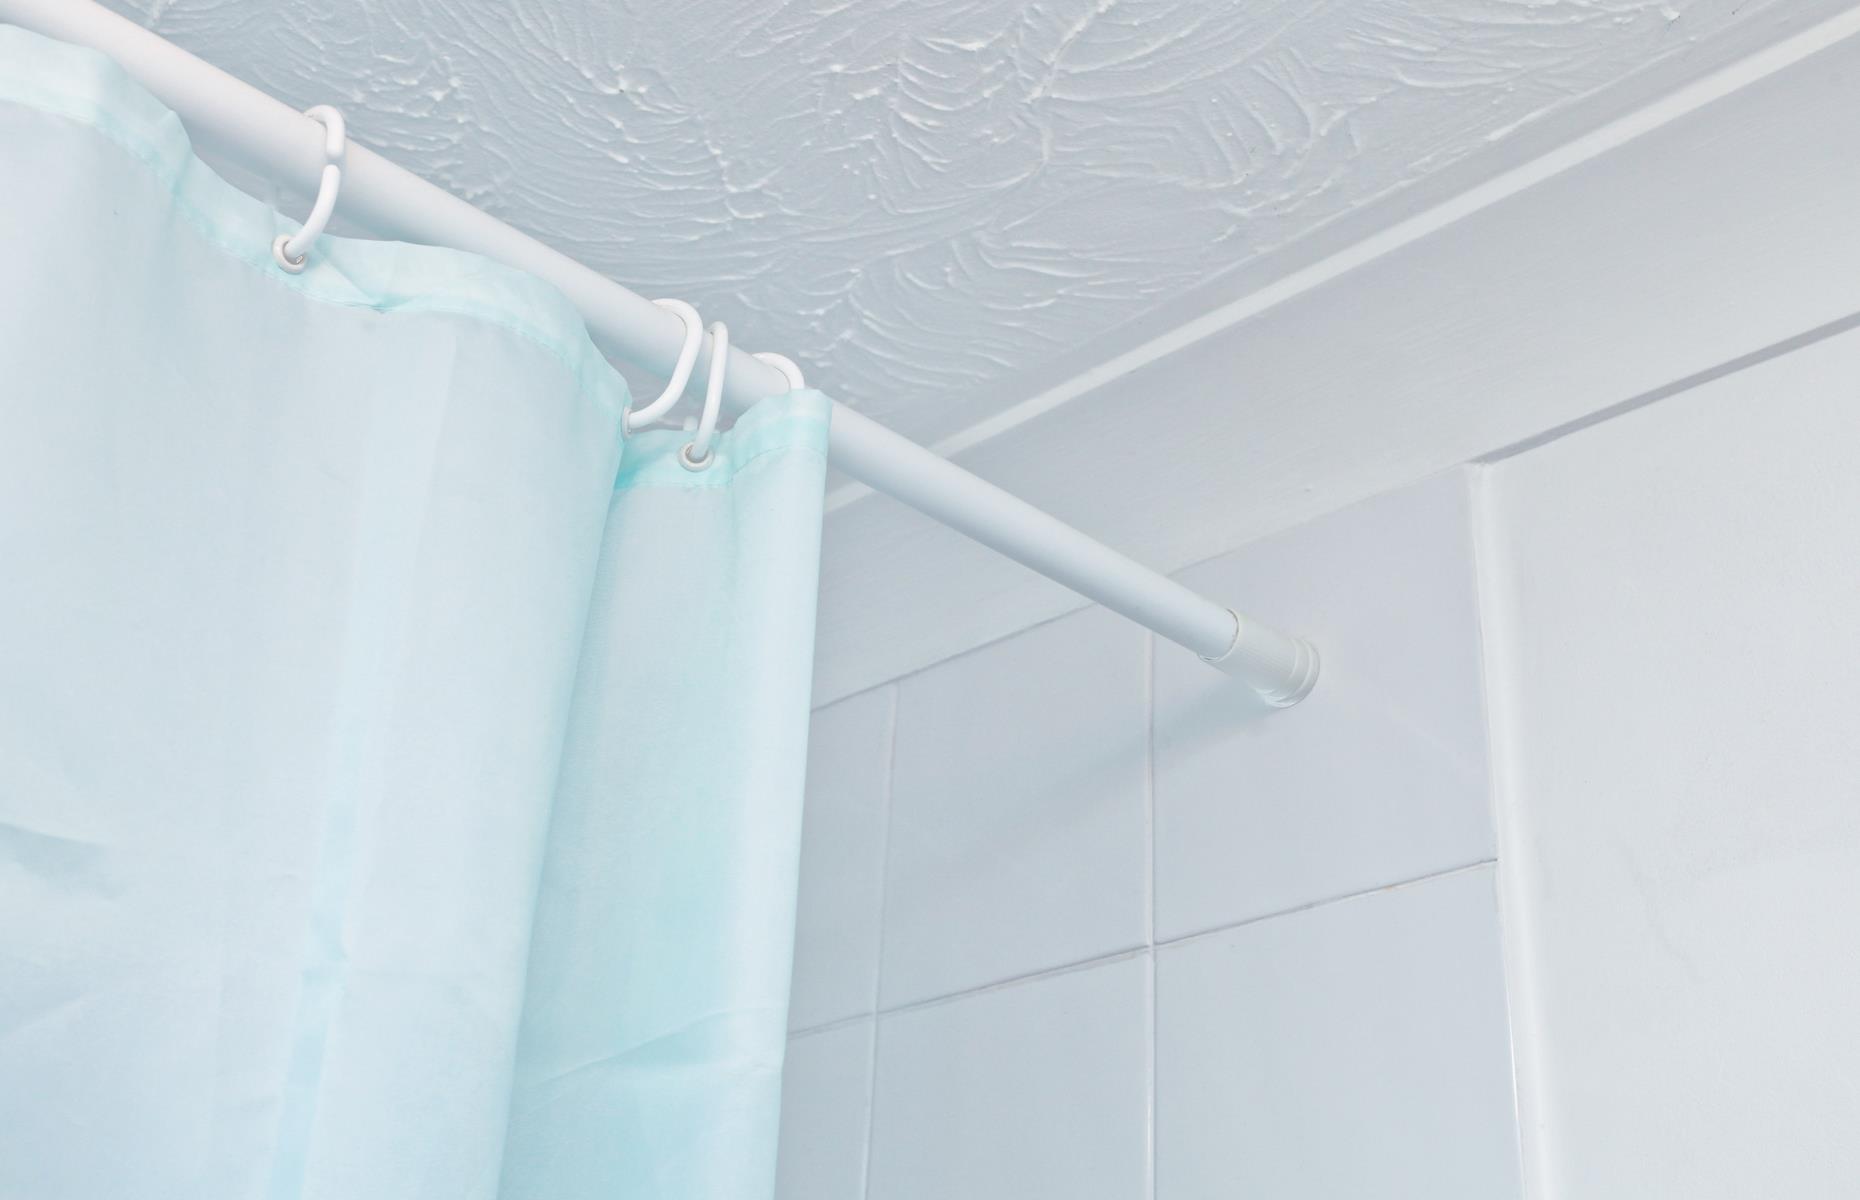 An extendable curtain rail, which can be adjusted to fit the space, is a minor miracle for RV users, especially in vans where space is at a premium. Put in your shower or across the width of your camper van for a temporary space to hang washing or damp towels. You could also use it for extra hanging space in a cupboard or closet.